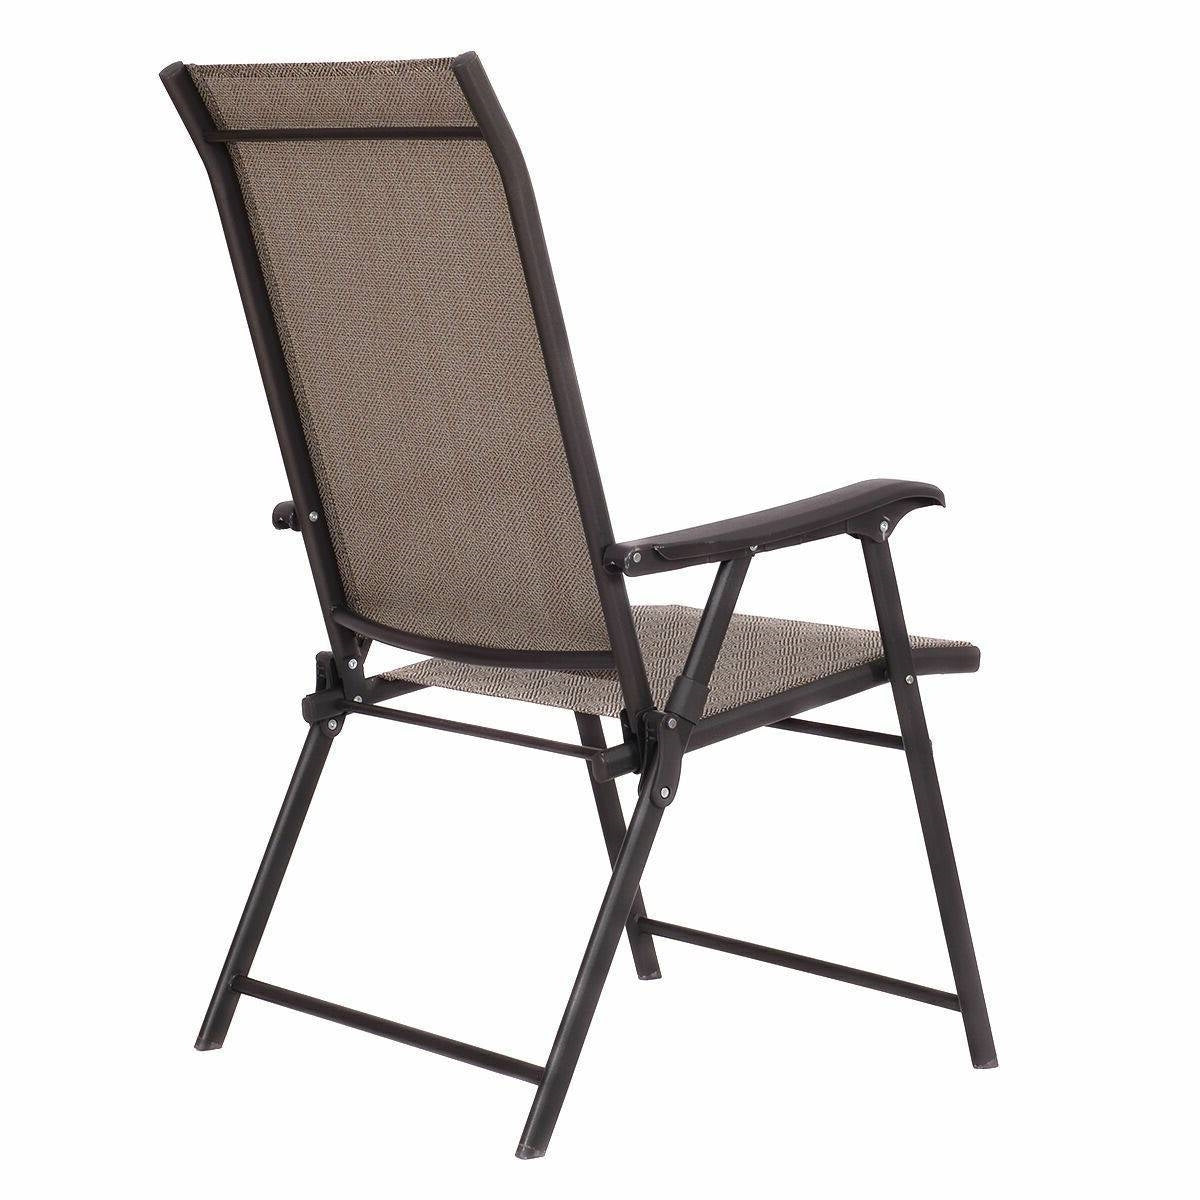 Set of 2 Outdoor Folding Patio Chairs in Brown with Black Metal Frame